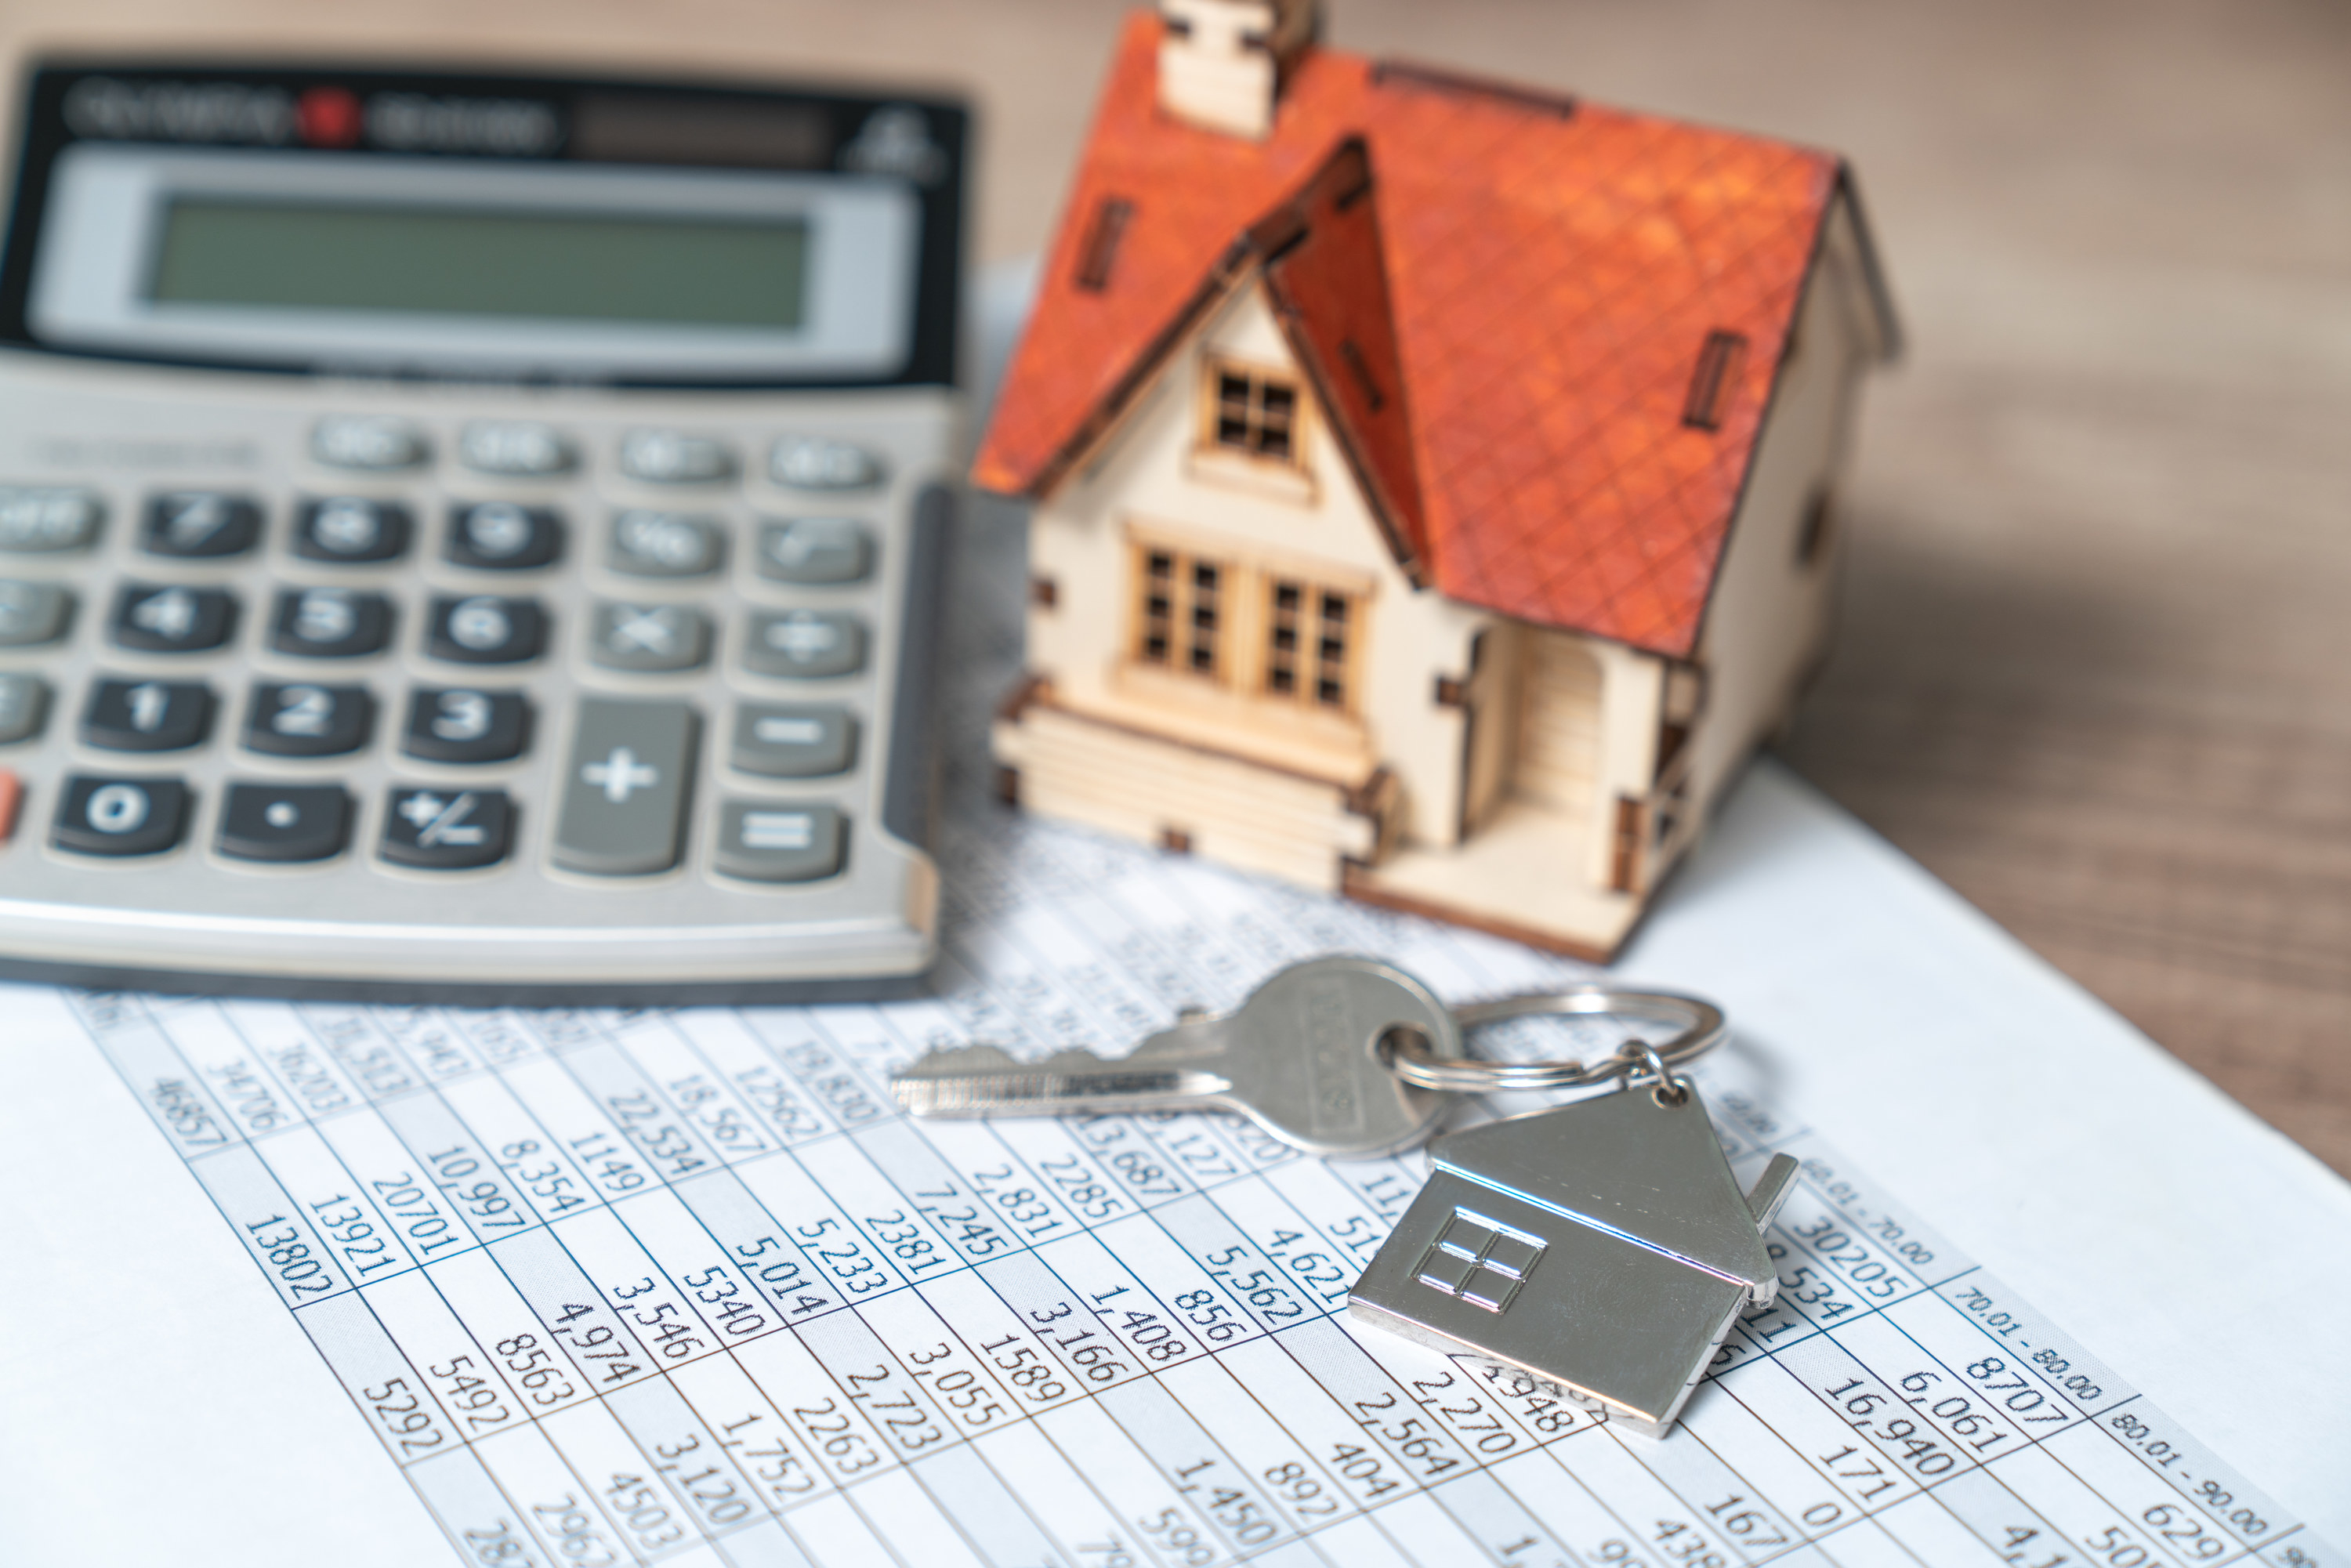 House keys and calculator on top of a spreadsheet showing mortgage rates